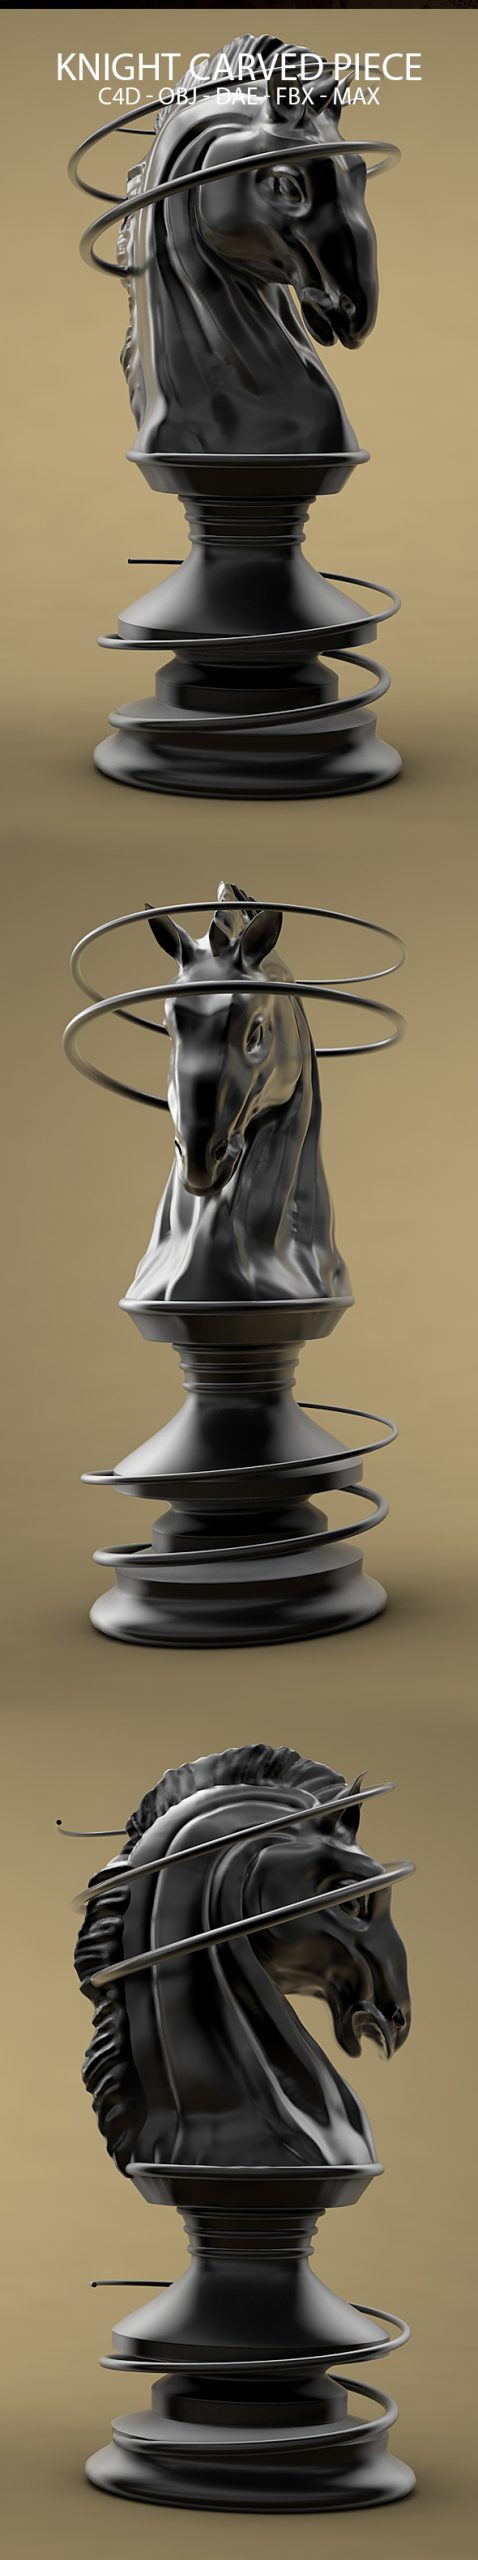 Sculpted Knight Chess Piece